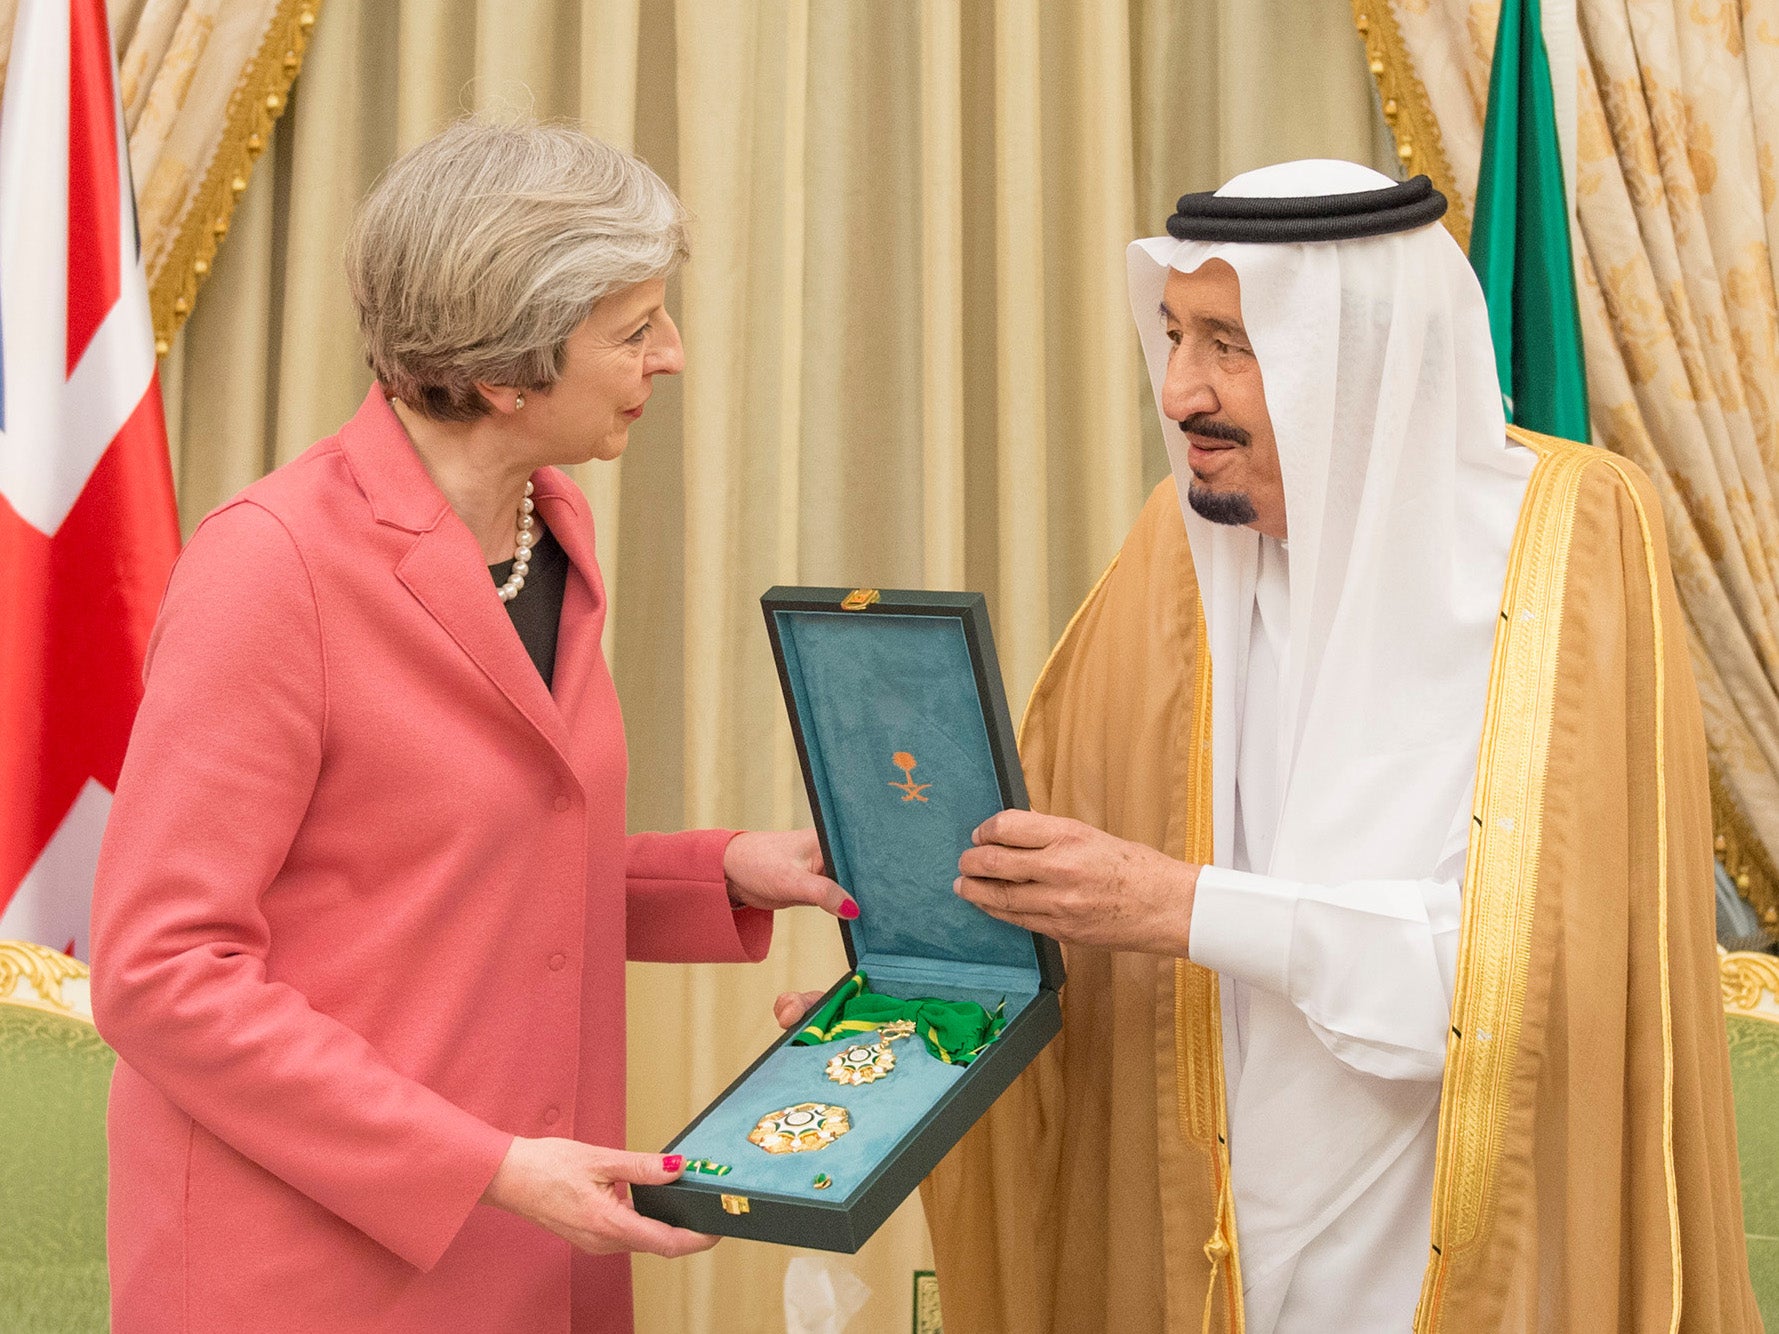 The PM refuses to comment on Saudi Arabia’s human rights violations